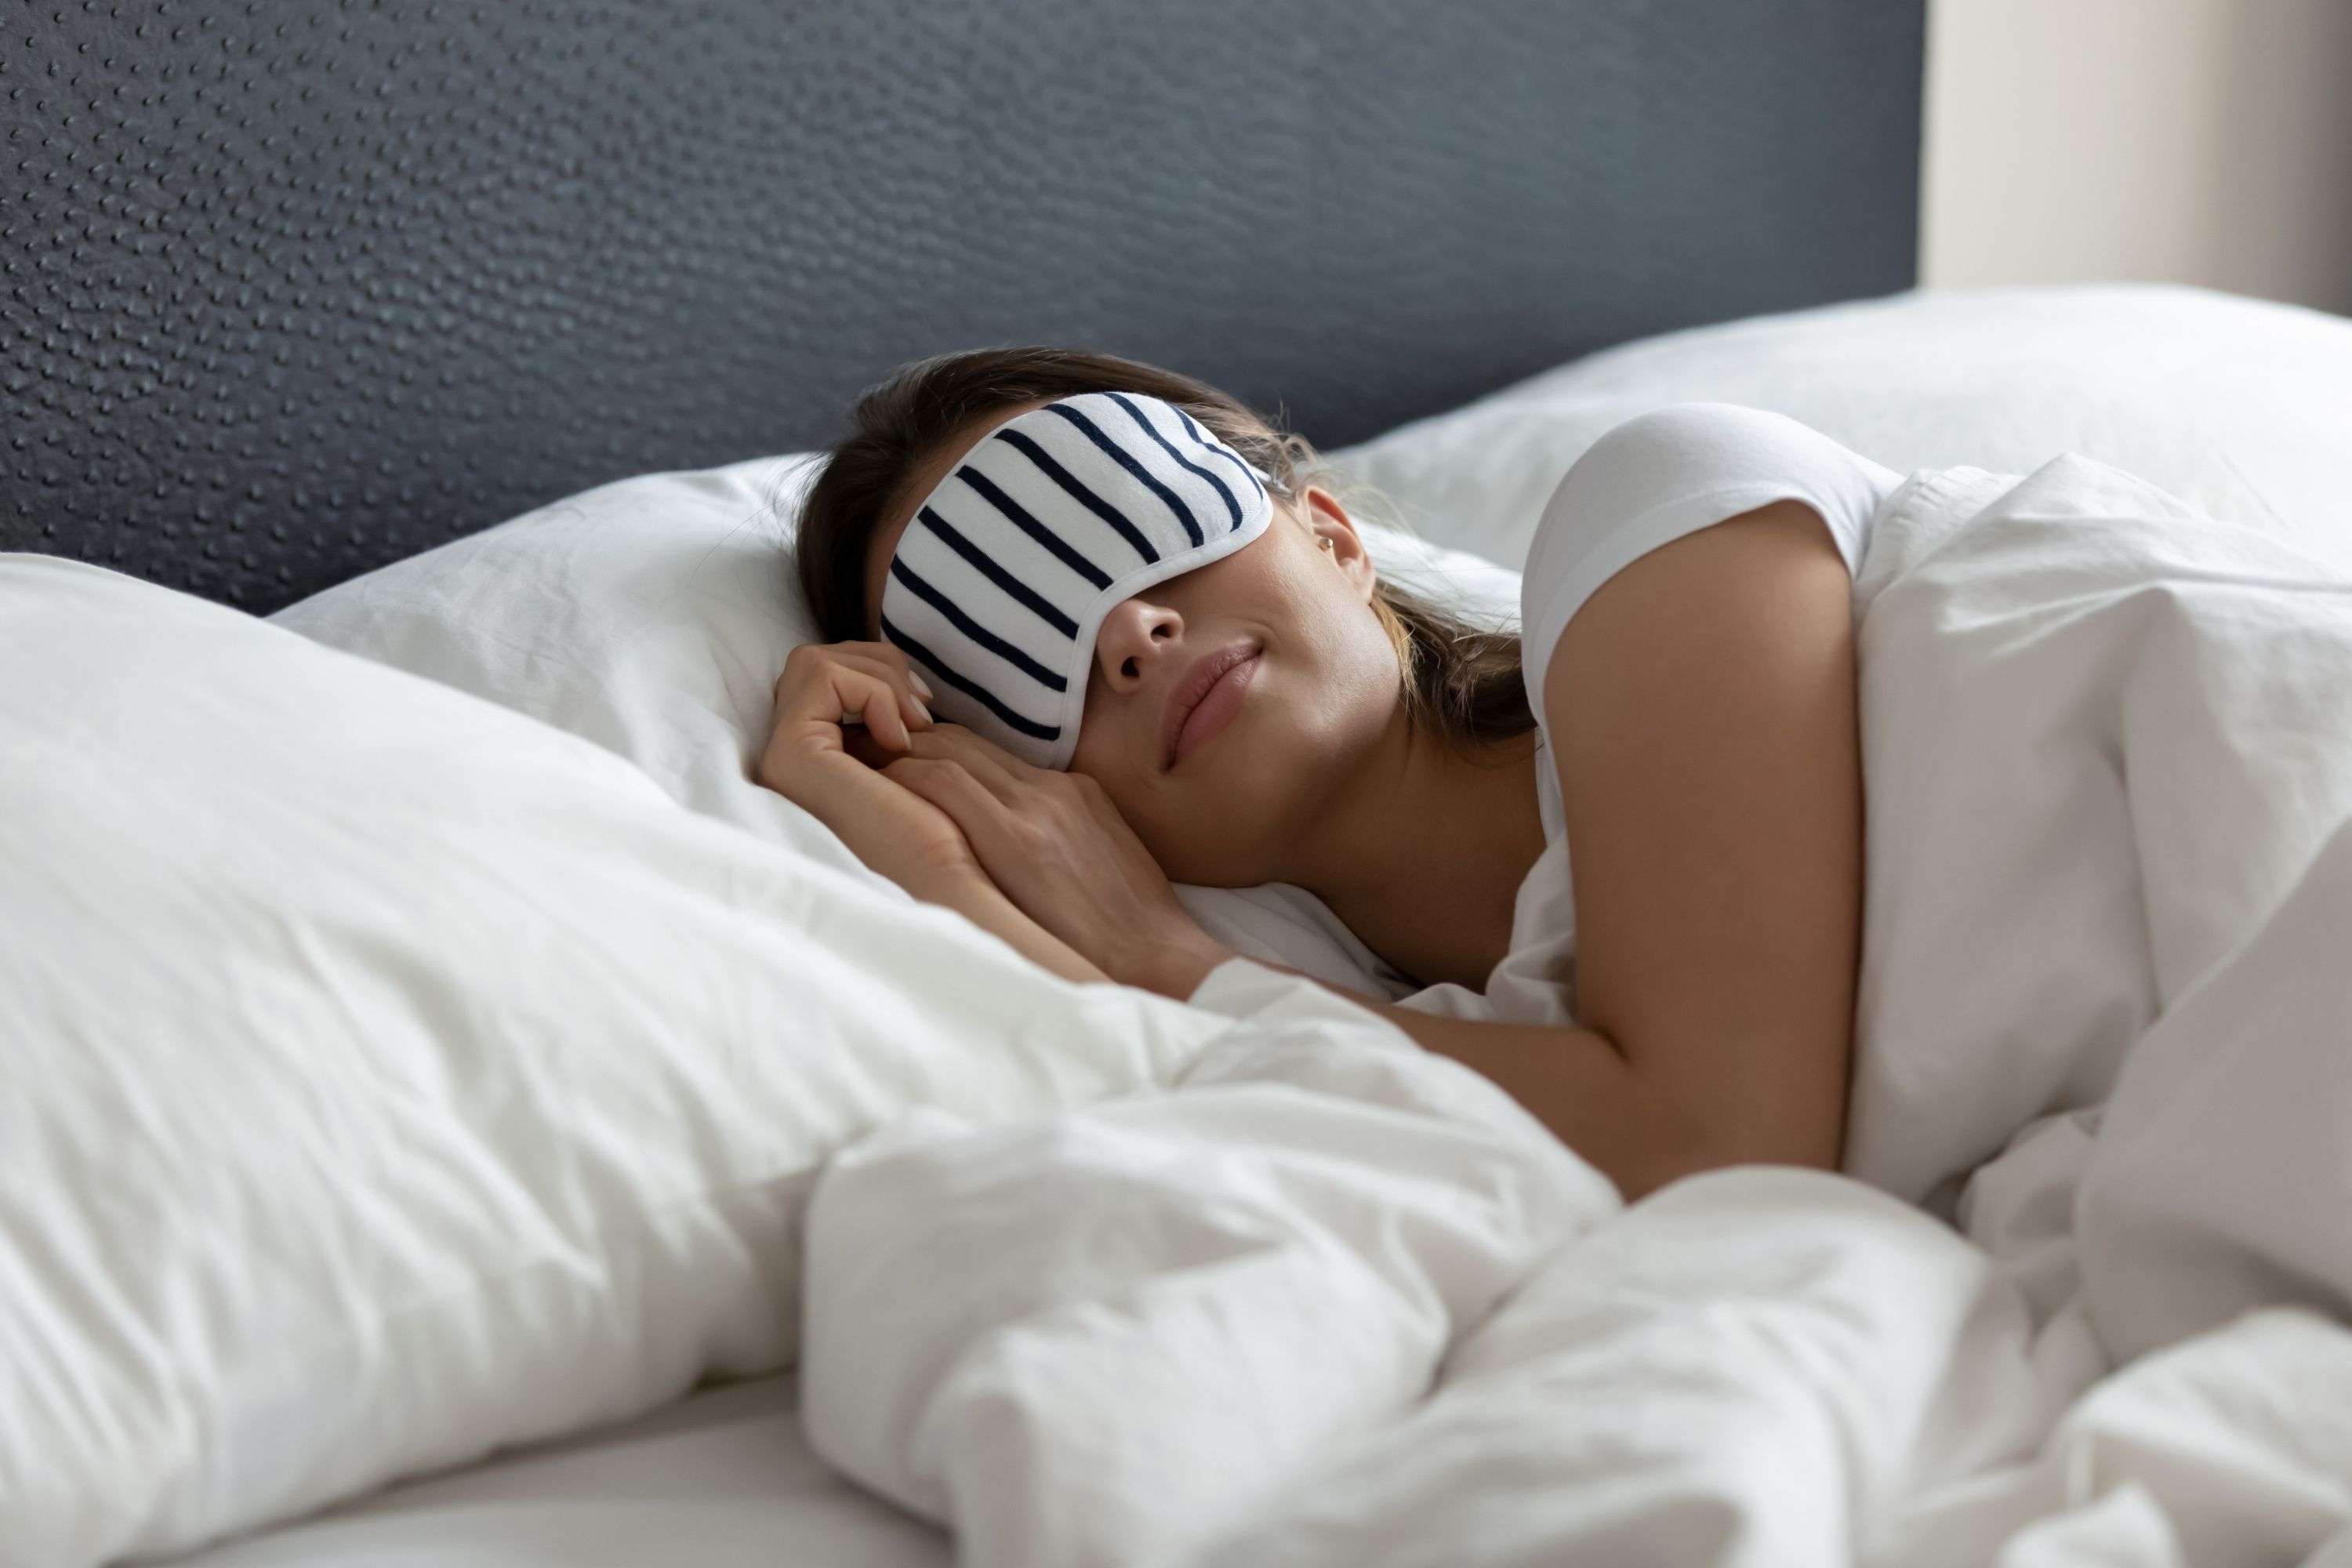 What happens to our health if we don’t get enough sleep all the time